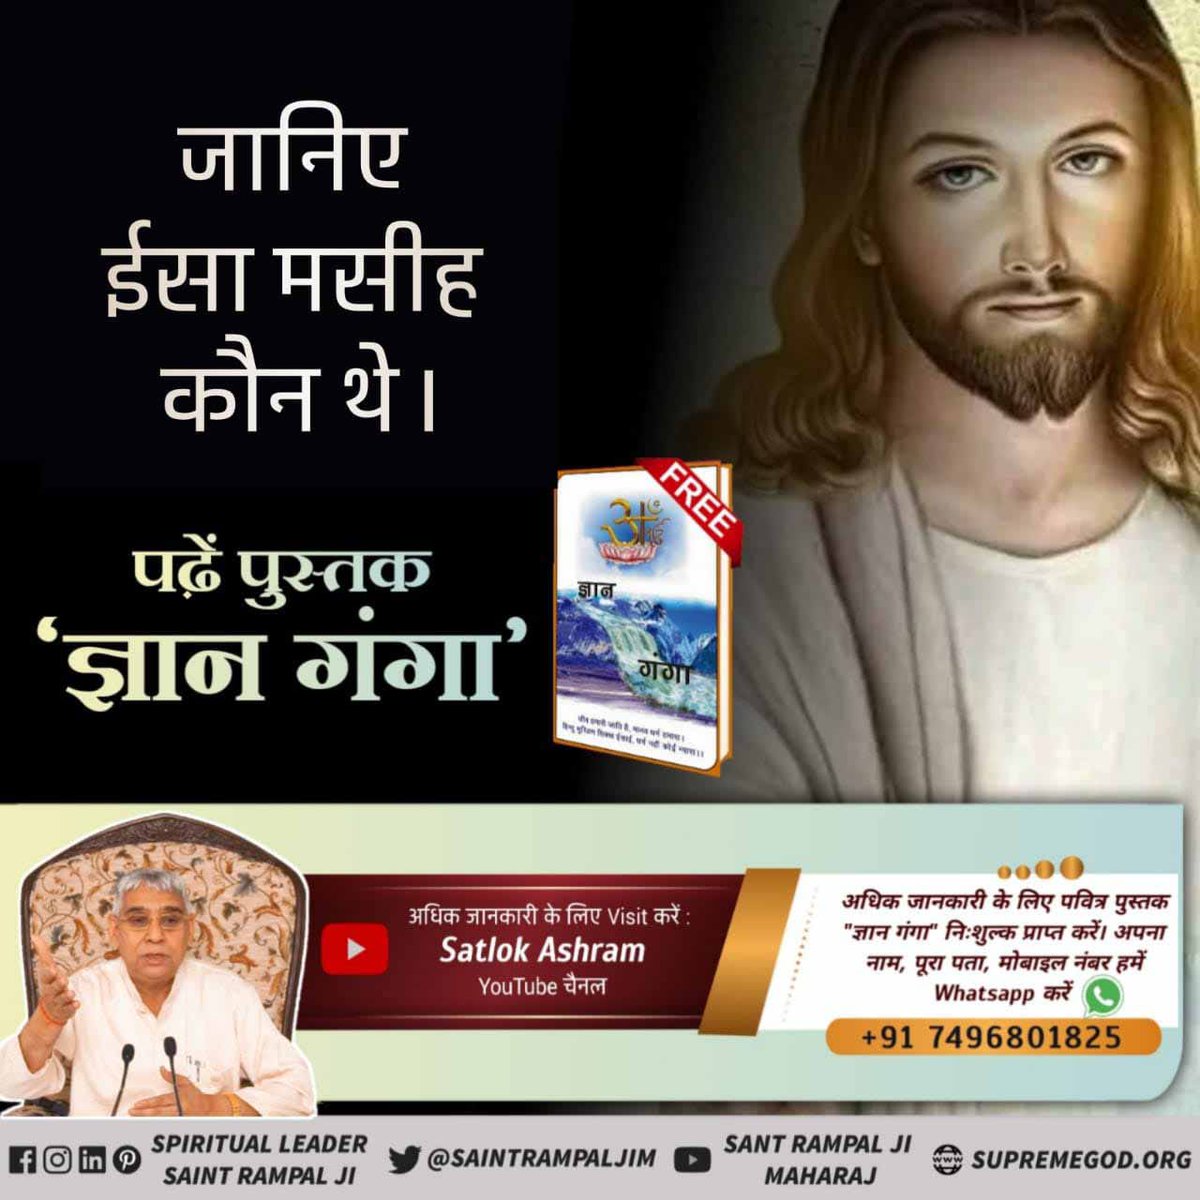 #ईसाई_नहीं_समझे_HolyBible
Let us know who Jesus Christ was, for this we will read Gyan Ganga. Gyan Ganga is a very wonderful book. After reading this we will have good knowledge.